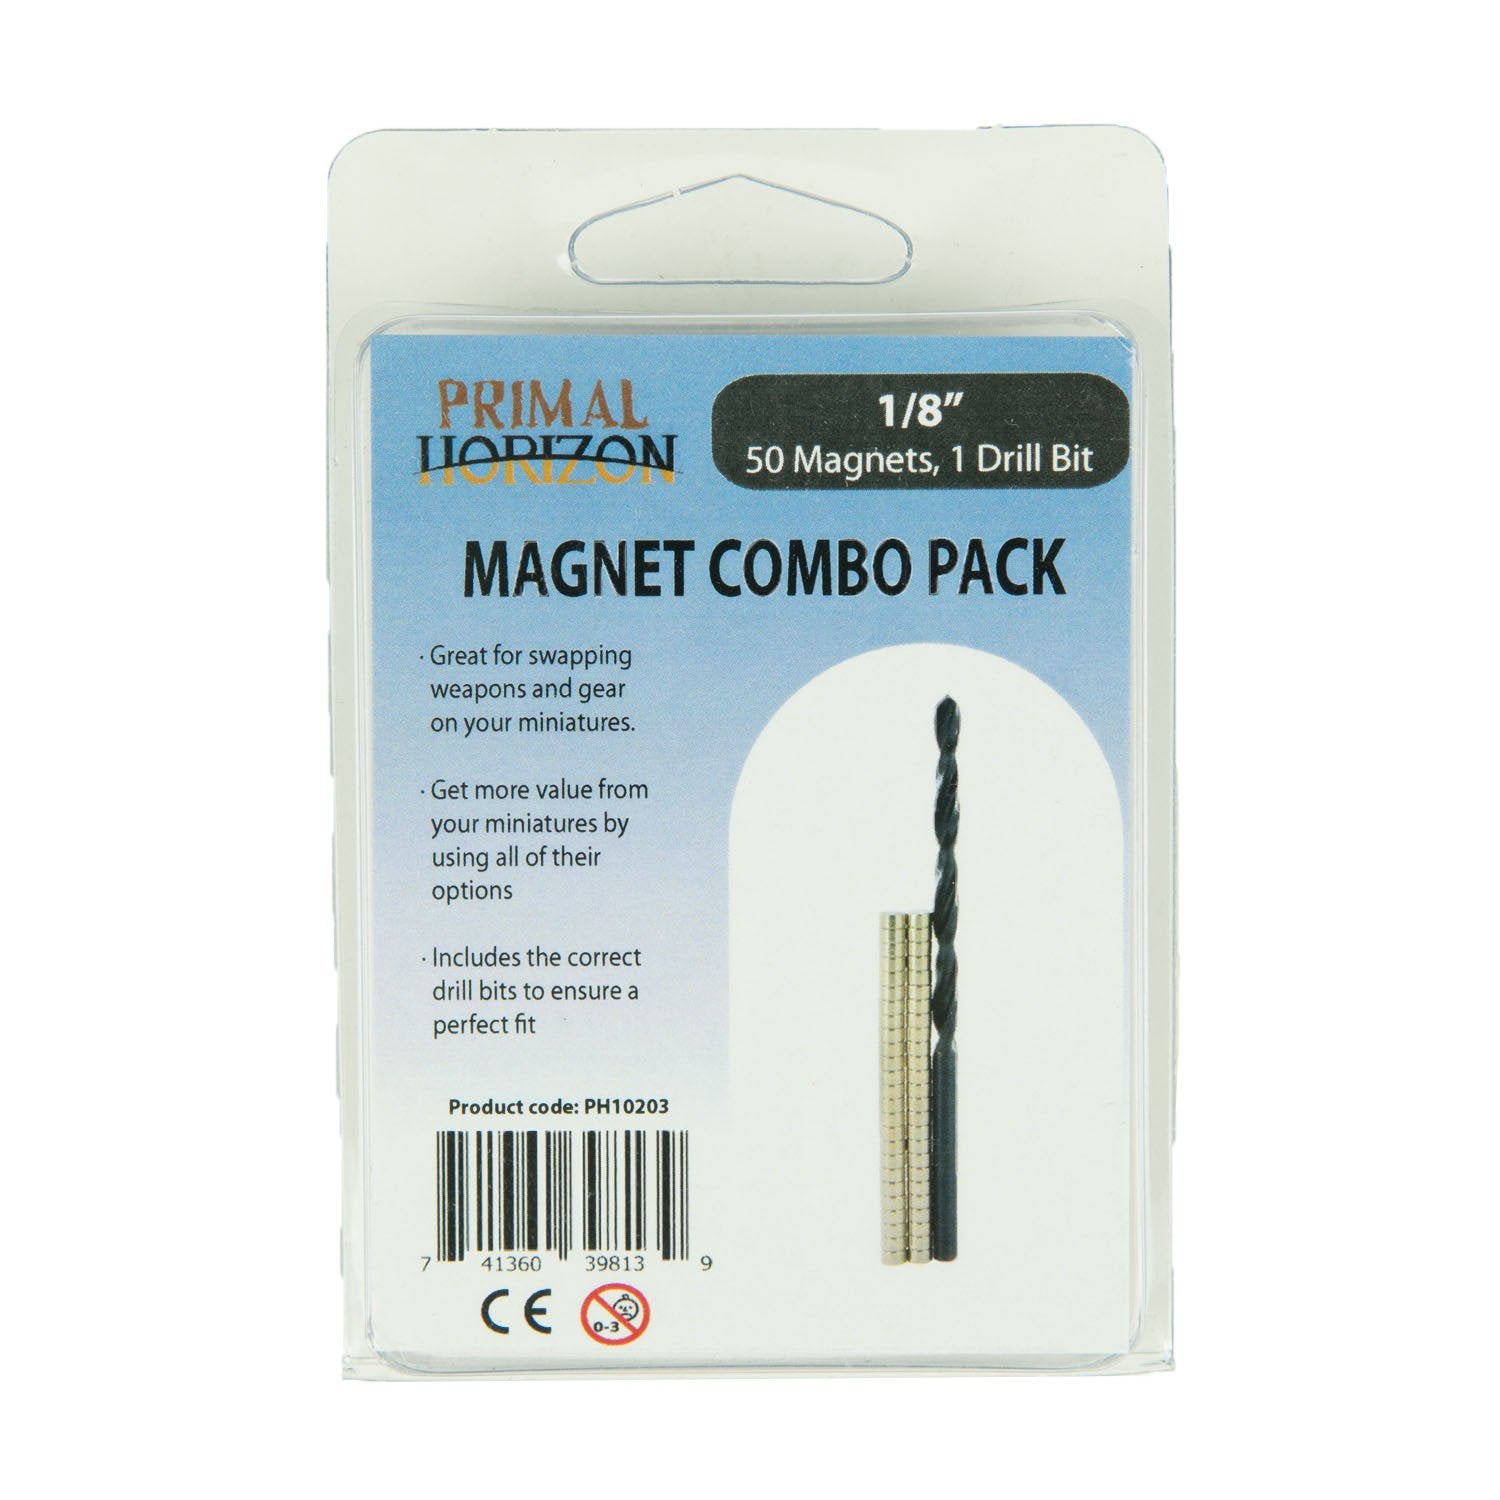 Magnet combo pack 1/8 (50) 1 drill bit | Boutique FDB